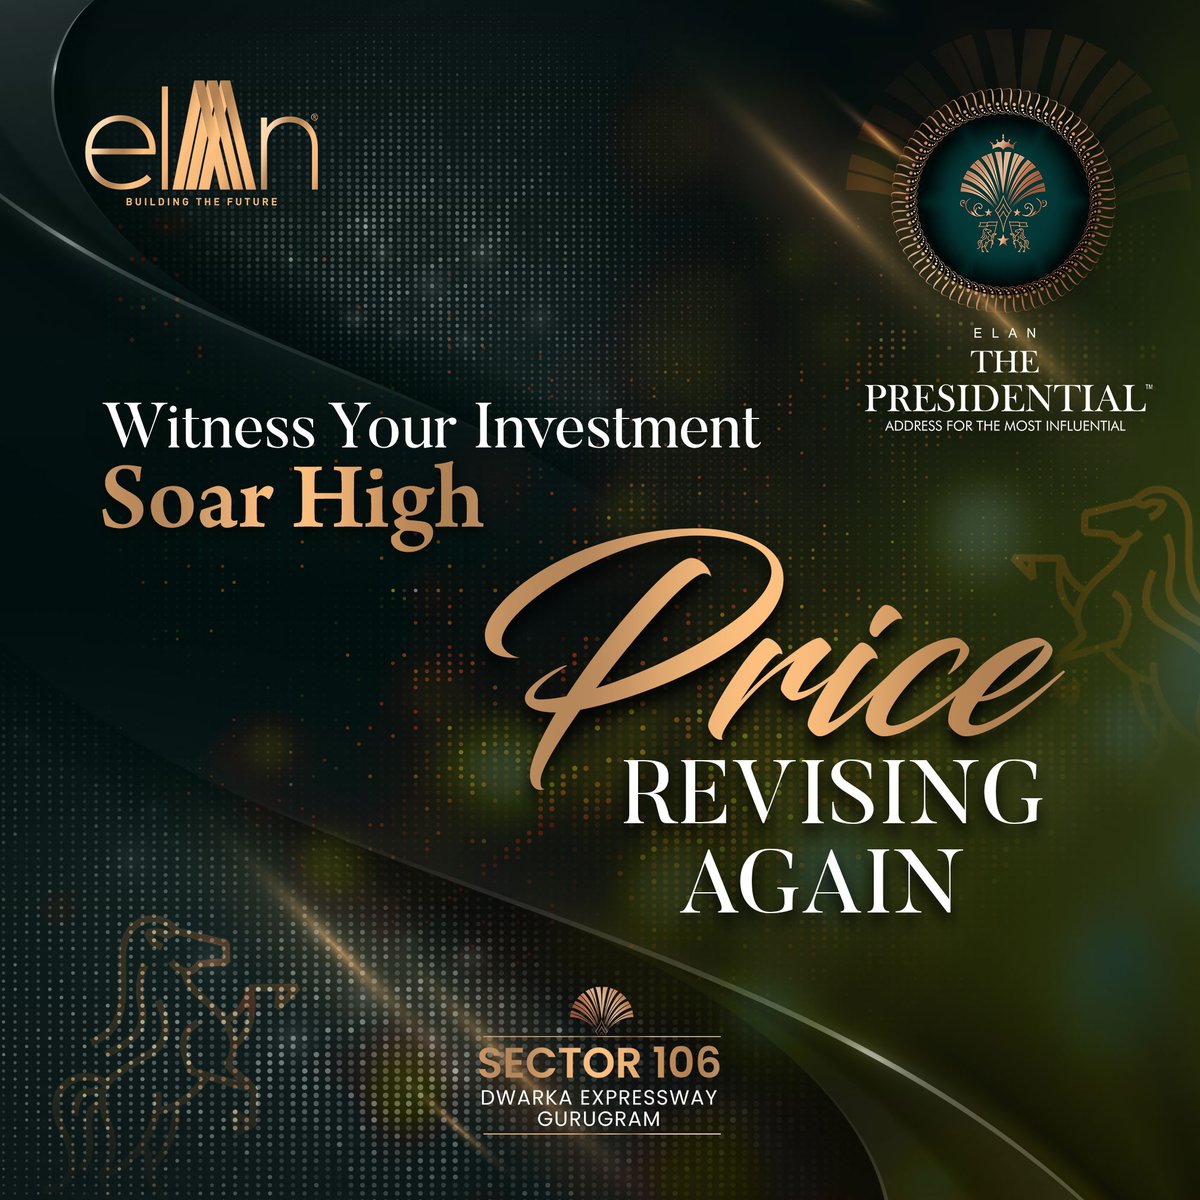 Get ready to witness your investment soar: Elan The  Presidential's price appreciation sets the stage for unprecedented growth!

#ElanGroup #ElanPresidential #Sector106 #ThePresidential #DwarkaExpressway #luxurywithelan #liveatelan #Gurguram #RealEstate #Luxury #Lifestyle